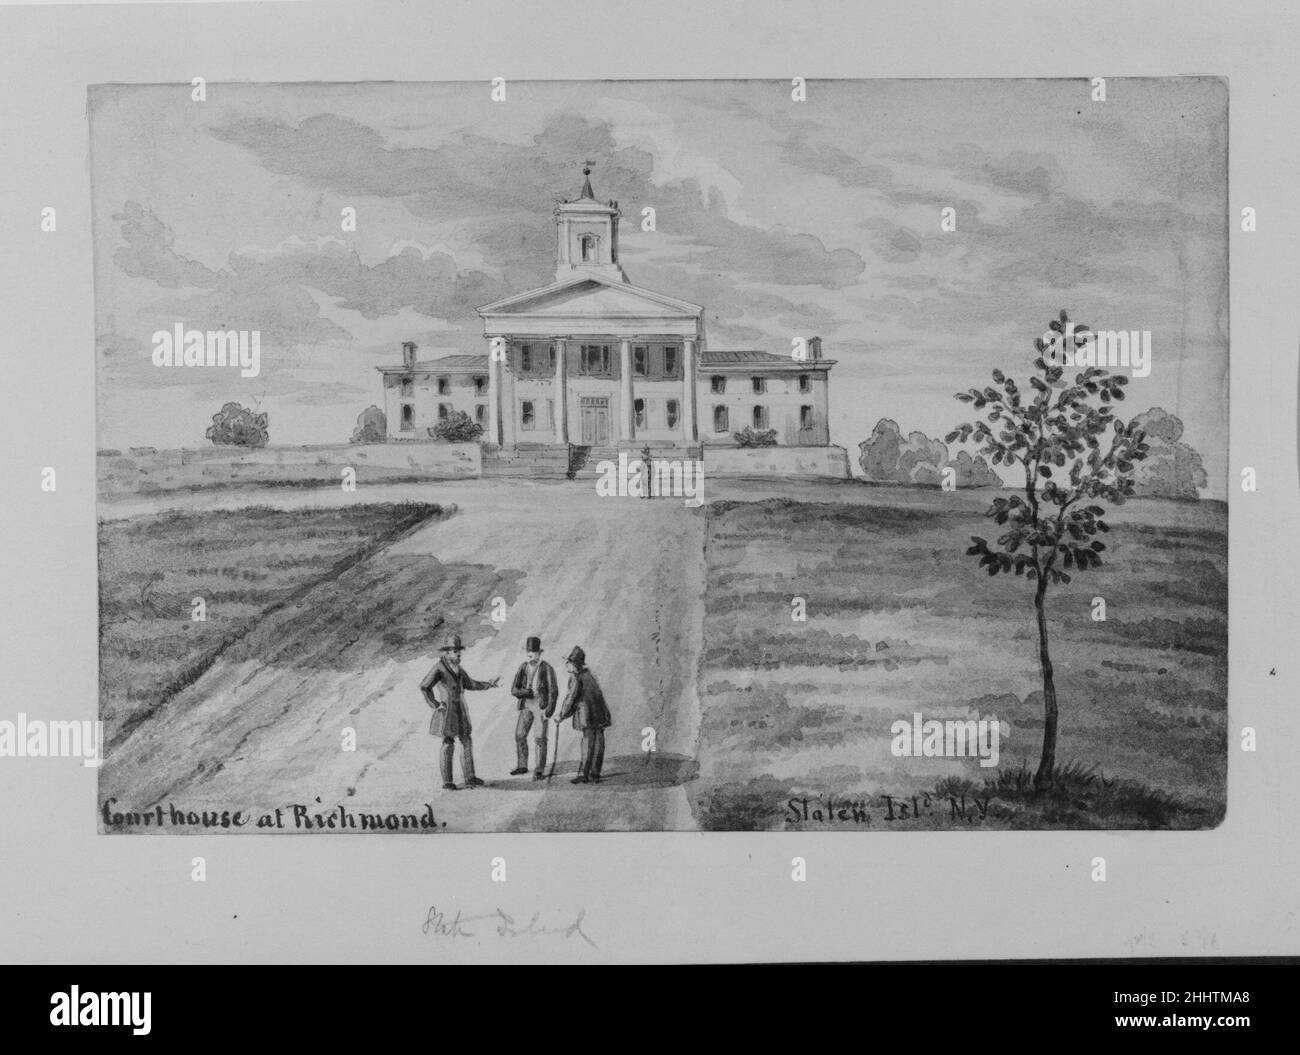 Courthouse at Richmond, Staten Island, New York ca. 1872 Augustus Köllner American. Courthouse at Richmond, Staten Island, New York. Augustus Köllner (American, born Wurttenburg, Germany 1812). ca. 1872. Watercolor. Drawings Stock Photo